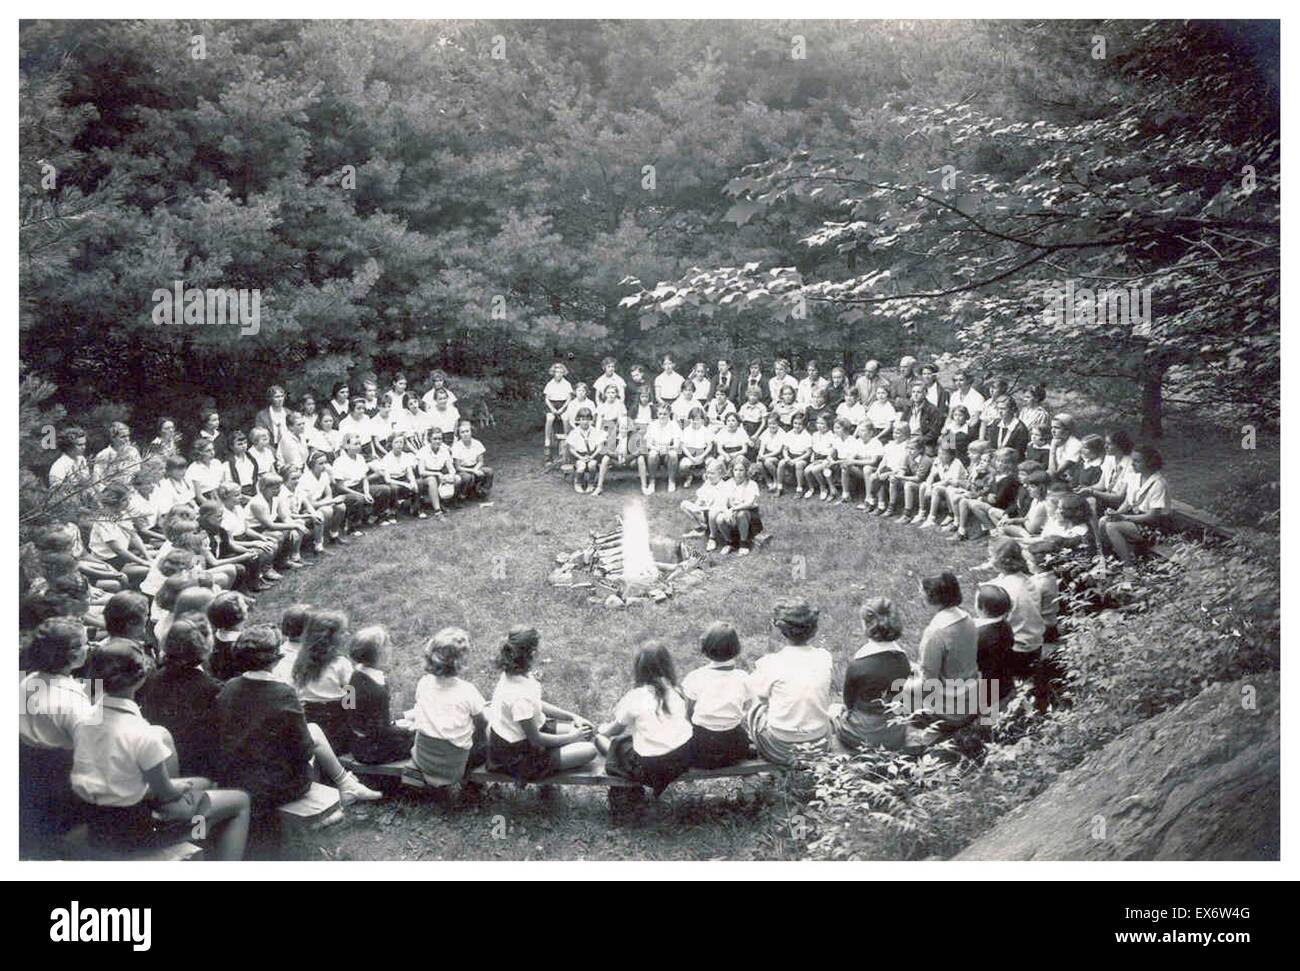 American Summer camp in 1935 for nearly 100 years at Aloha Hive in Fairlee, Vermont have ended their day with a feeling of magic and community in evening circle. Stock Photo